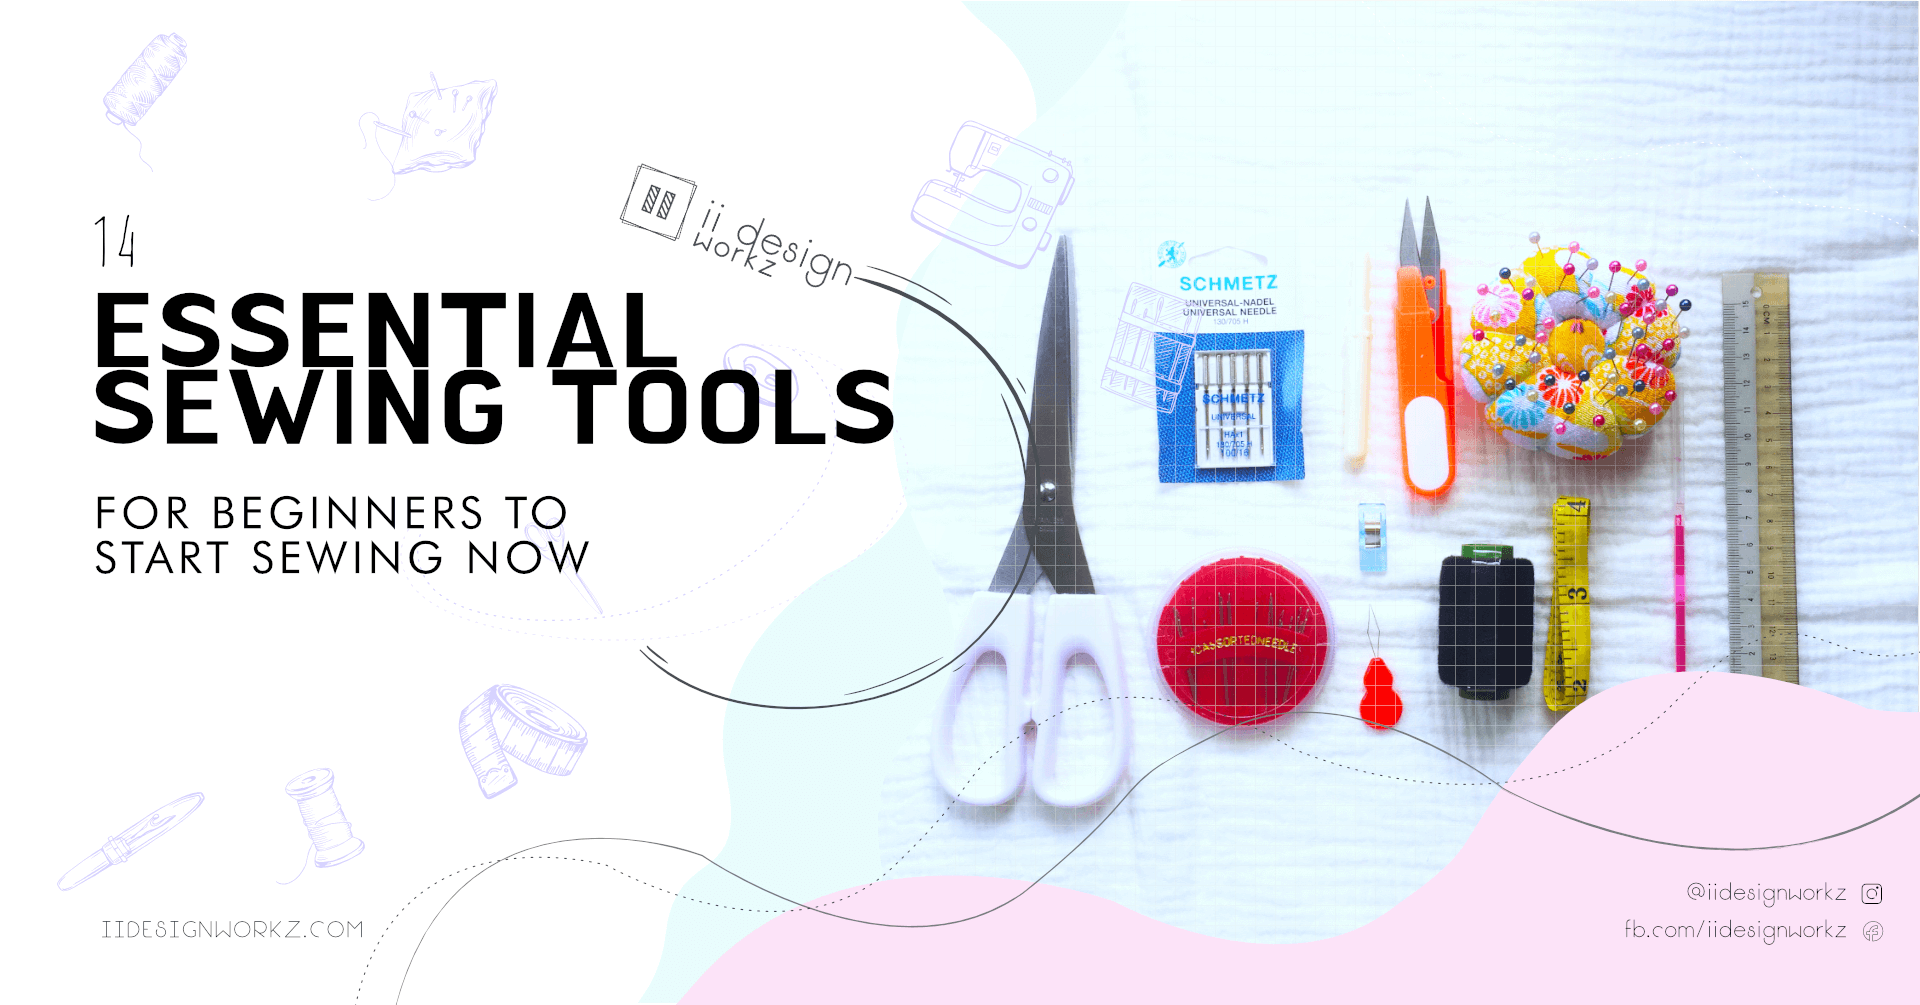 Blog Article: 14 Essential Sewing Tools For Beginners to Start Sewing Now 「 ii Design Workz 」